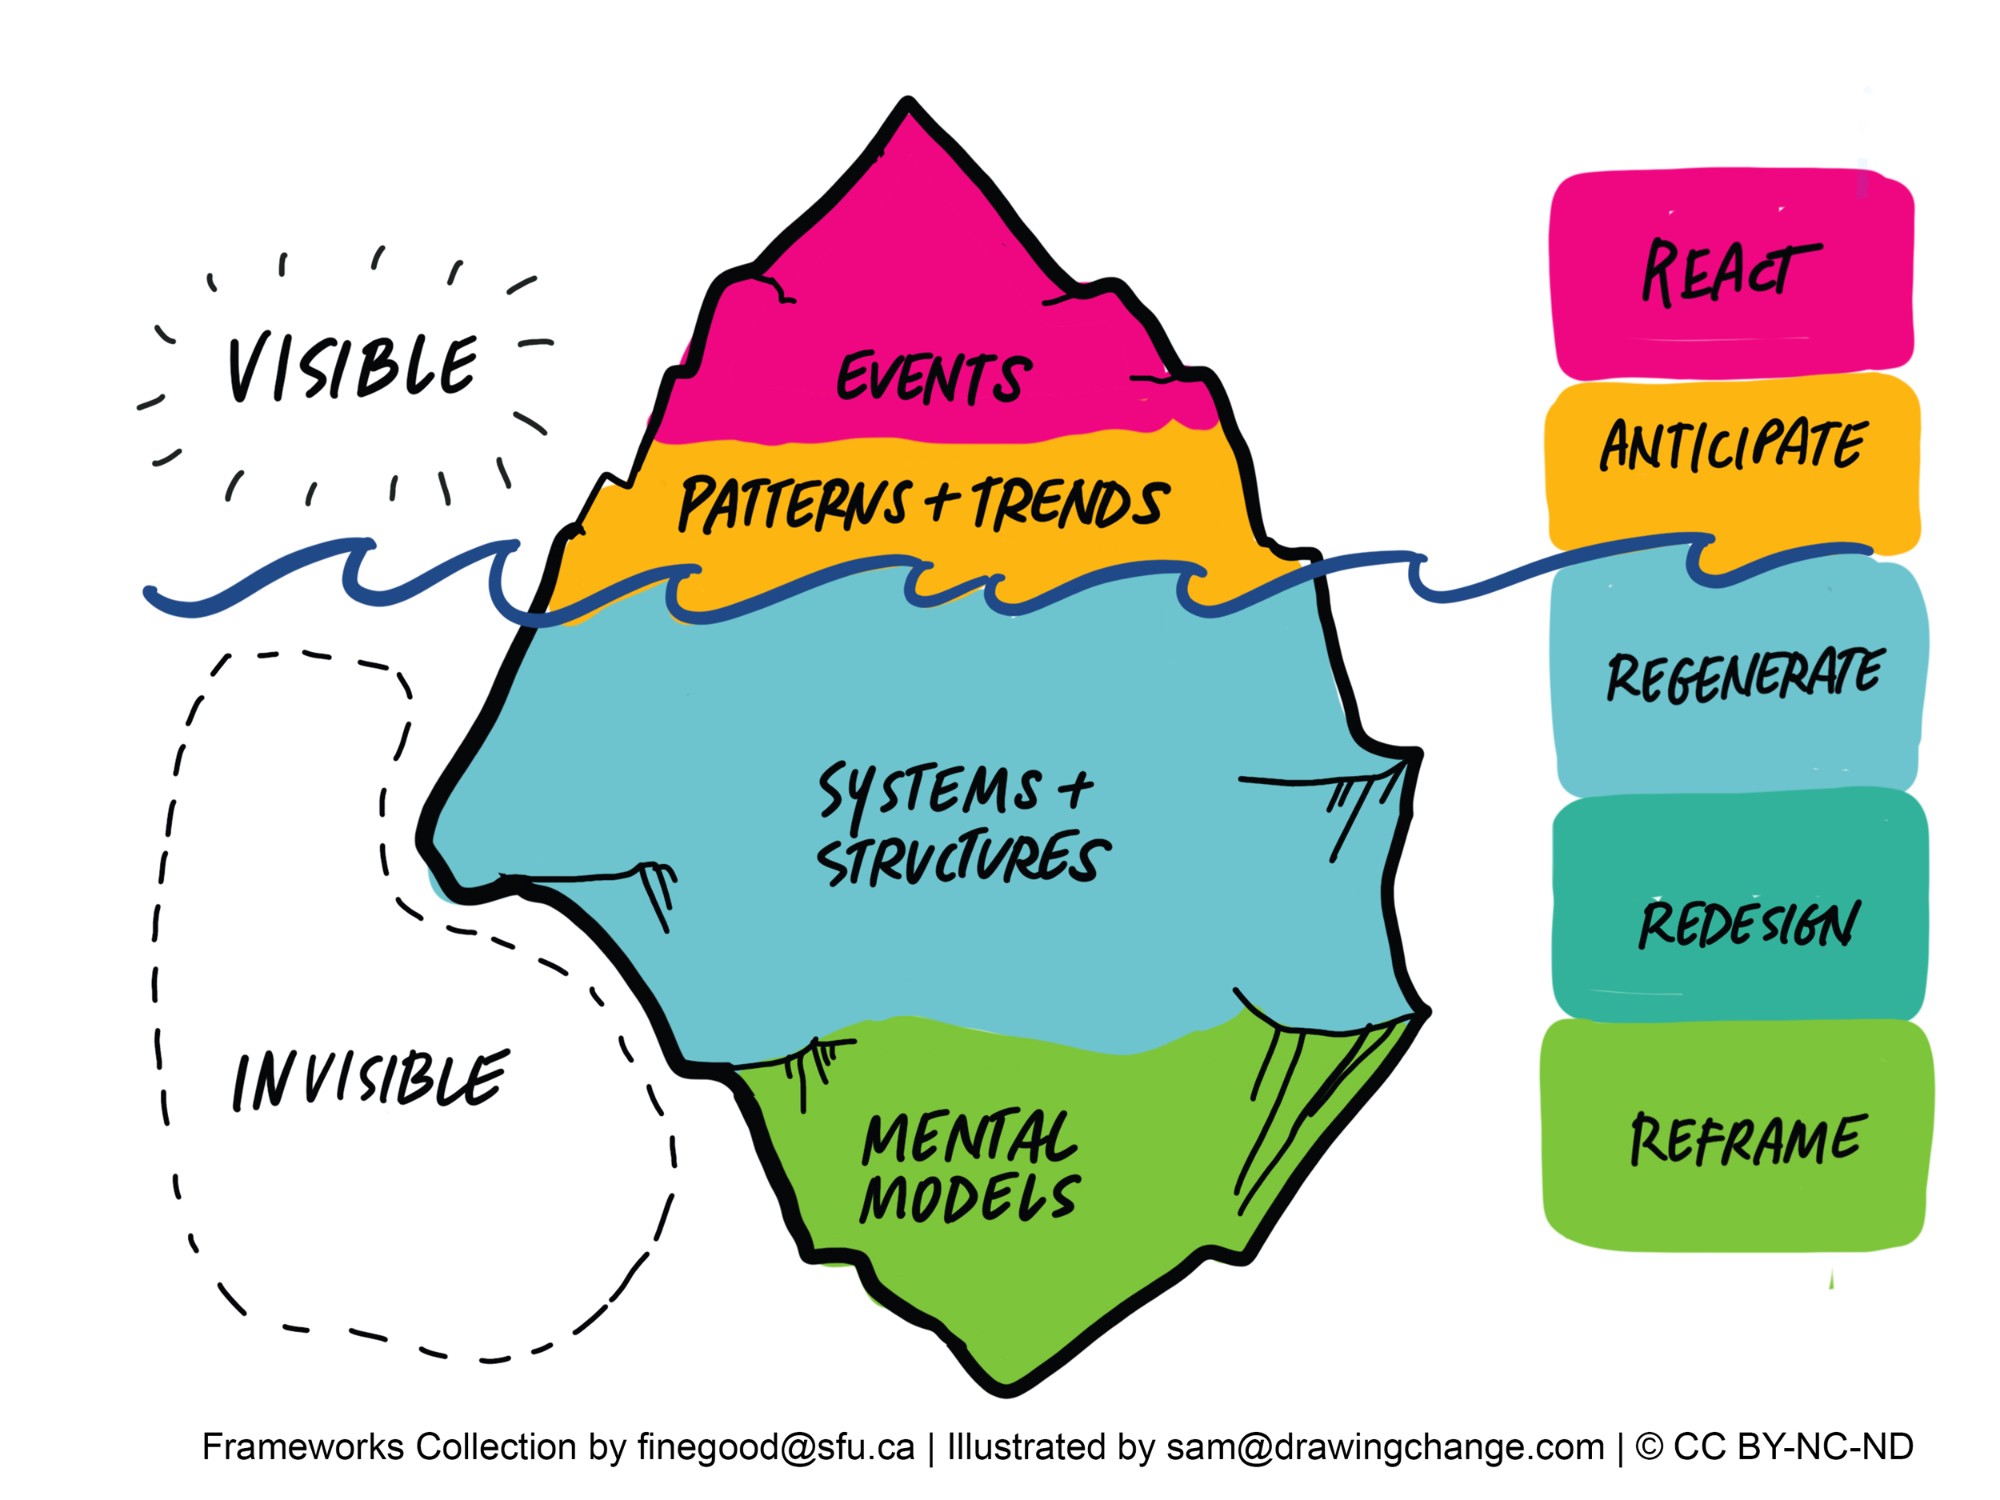 The image features an iceberg metaphor for organizational structure. At the top of the iceberg, above the waterline labeled "VISIBLE," there are two sections: a pink one labeled "EVENTS" and a yellow one labeled "PATTERNS + TRENDS." These represent the elements of an organization that are easy to see and notice.  Below the waterline, labeled "INVISIBLE," the larger part of the iceberg is divided into two sections: a blue one labeled "SYSTEMS + STRUCTURES" and a green one at the bottom labeled "MENTAL MODELS." These symbolize the underlying aspects of an organization that are not immediately apparent but are crucial to its functioning.  To the right side, there are action blocks indicating responses at different levels of the iceberg: - "REACT" to "EVENTS" - "ANTICIPATE" relates to "PATTERNS + TRENDS" - "REGENERATE" and "REDESIGN" icorrespond to "SYSTEMS + STRUCTURES" - "REFRAME" iis associated with "MENTAL MODELS"  The image has a doodle-like style with handwritten text, and it uses bright, contrasting colors to differentiate between the various sections of the iceberg and suggested actions.